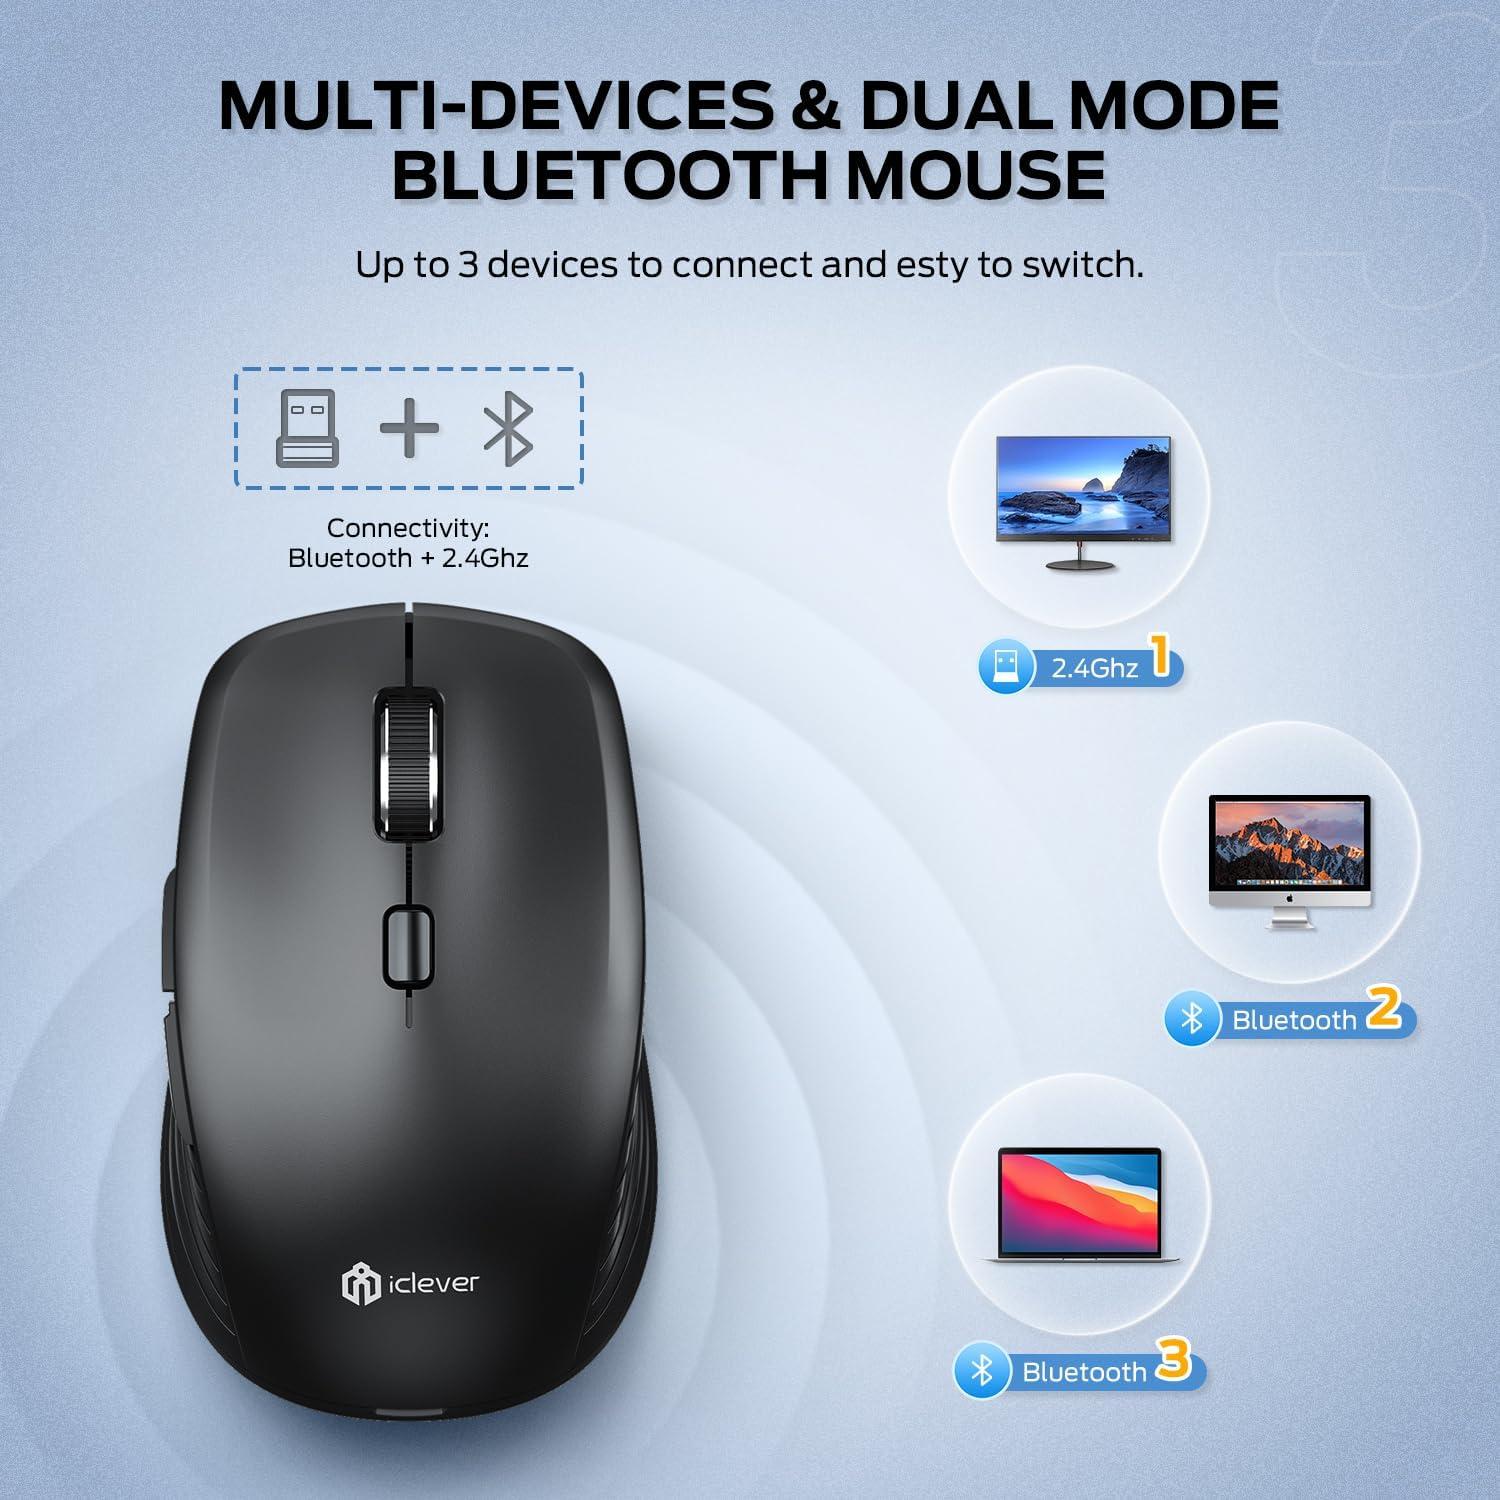 iClever GK08 Wireless Keyboard and Mouse - Rechargeable Keyboard